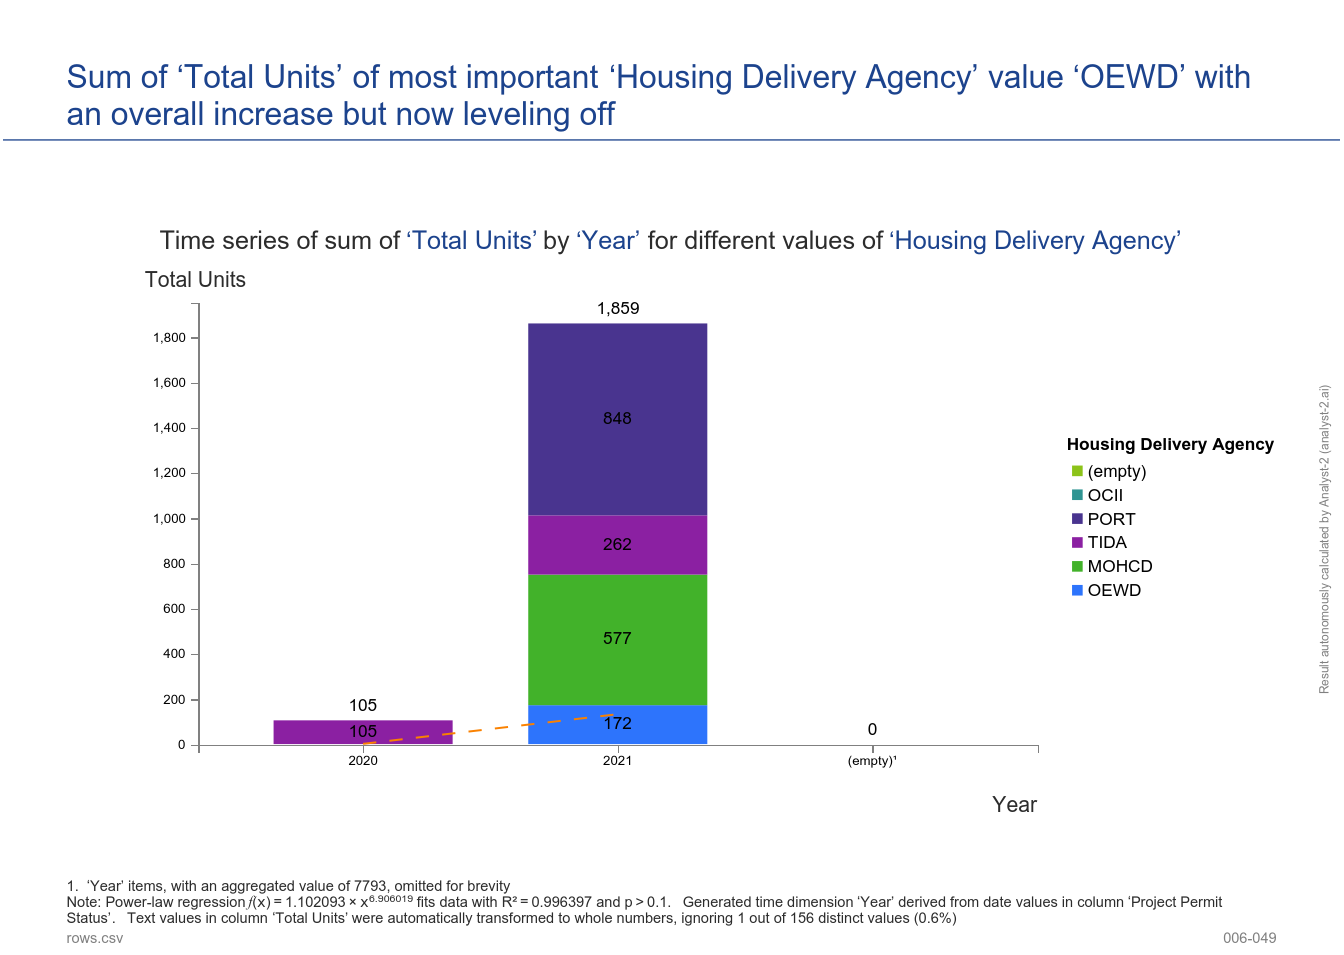 Sum of ‘Total Units’ of most important ‘Housing Delivery Agency’ value ‘OEWD’ with an overall increase but now leveling off. ([DRAFT] Priority Permits - 006-049)